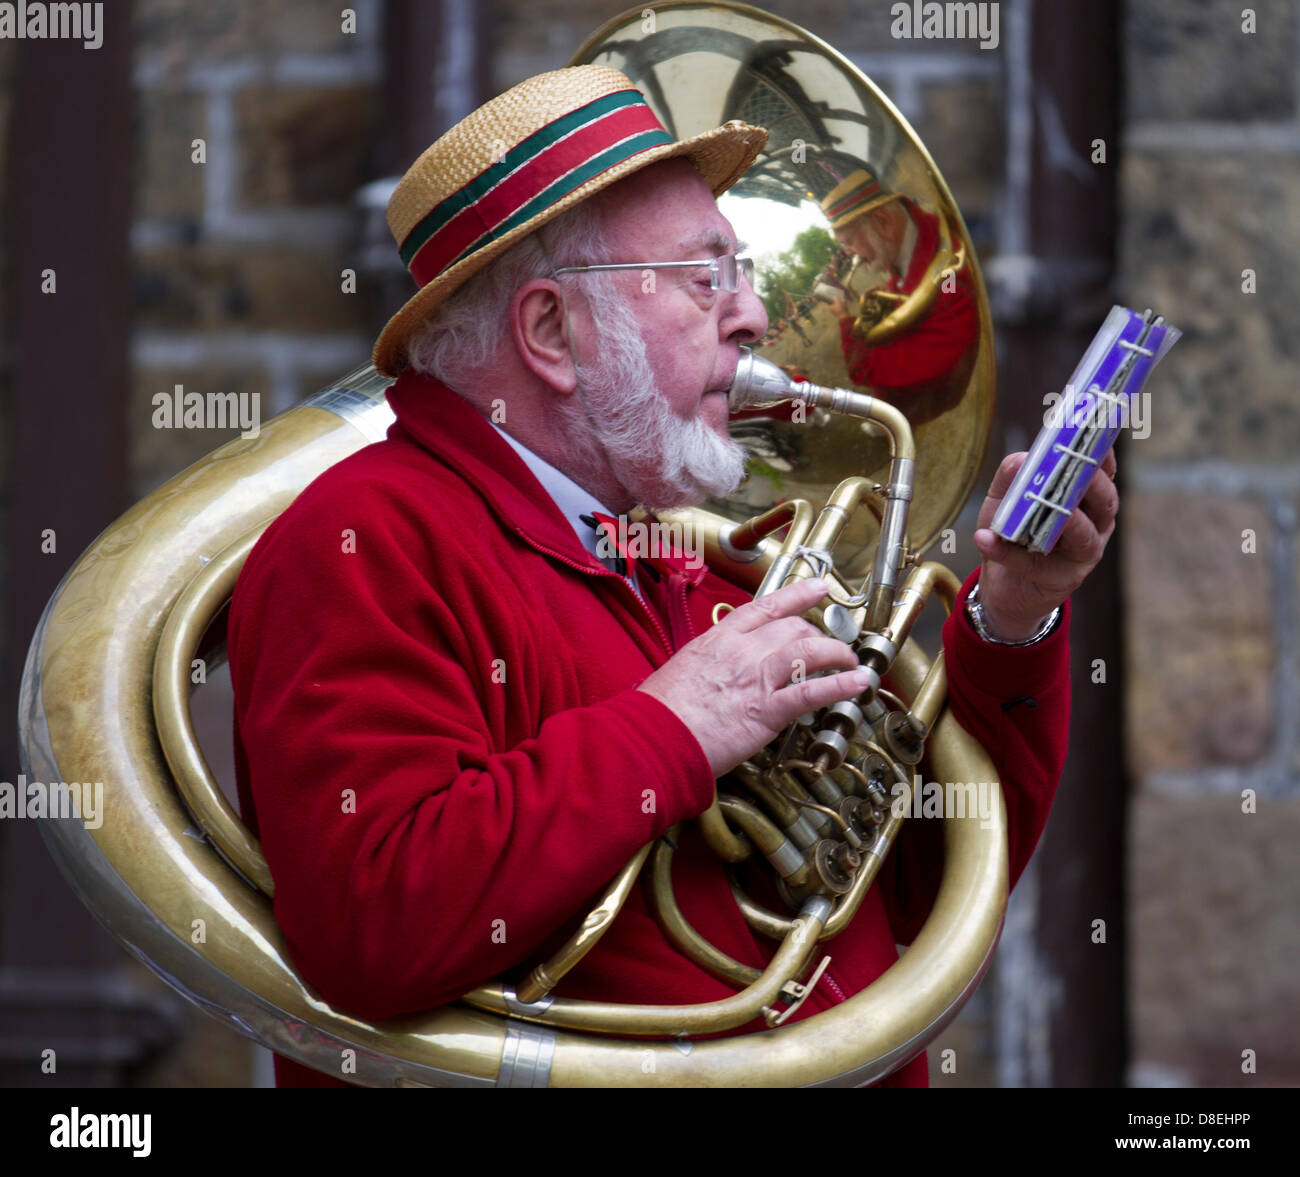 Turton tower, Lancashire, UK 27th May 2013.  Jeffrey Gilpin a player in Bourbon Brass Band at the annual traditional spring fair held in the grounds of the 600-year-old Turton Tower.  The event dates back more than 200 years, but went into decline in the early 20th century. It was revived in 2008 by the Friends of Turton Tower. Stock Photo